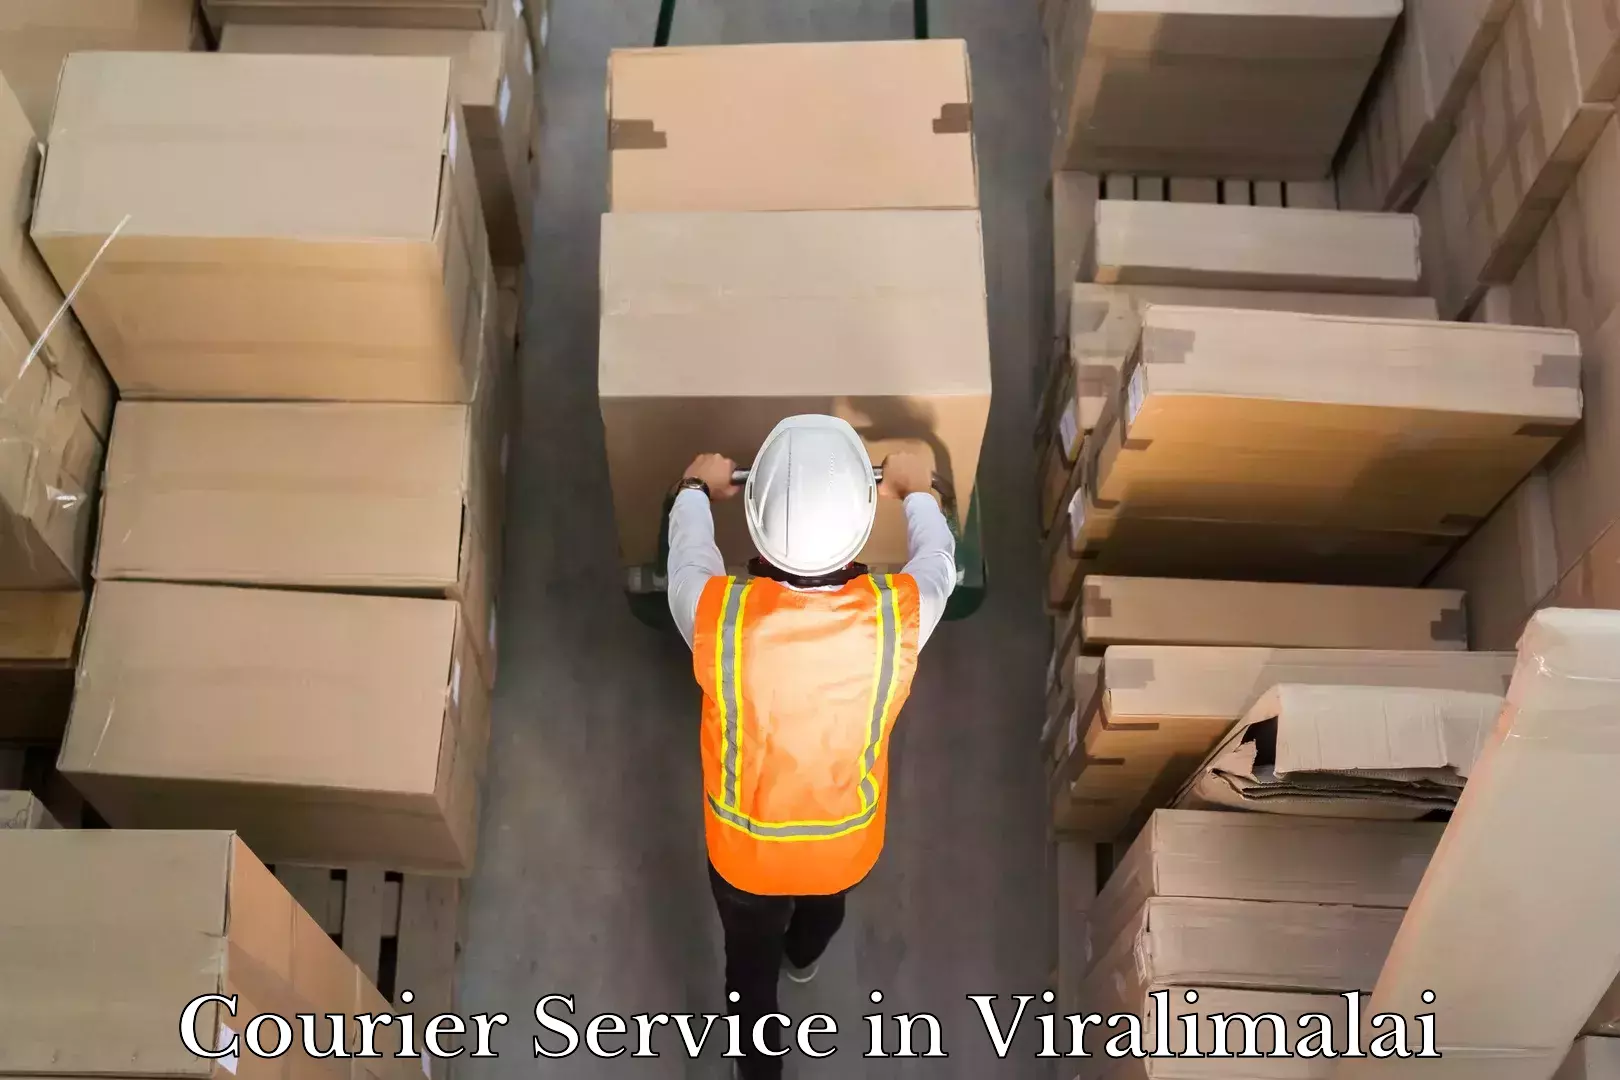 Courier service innovation in Viralimalai